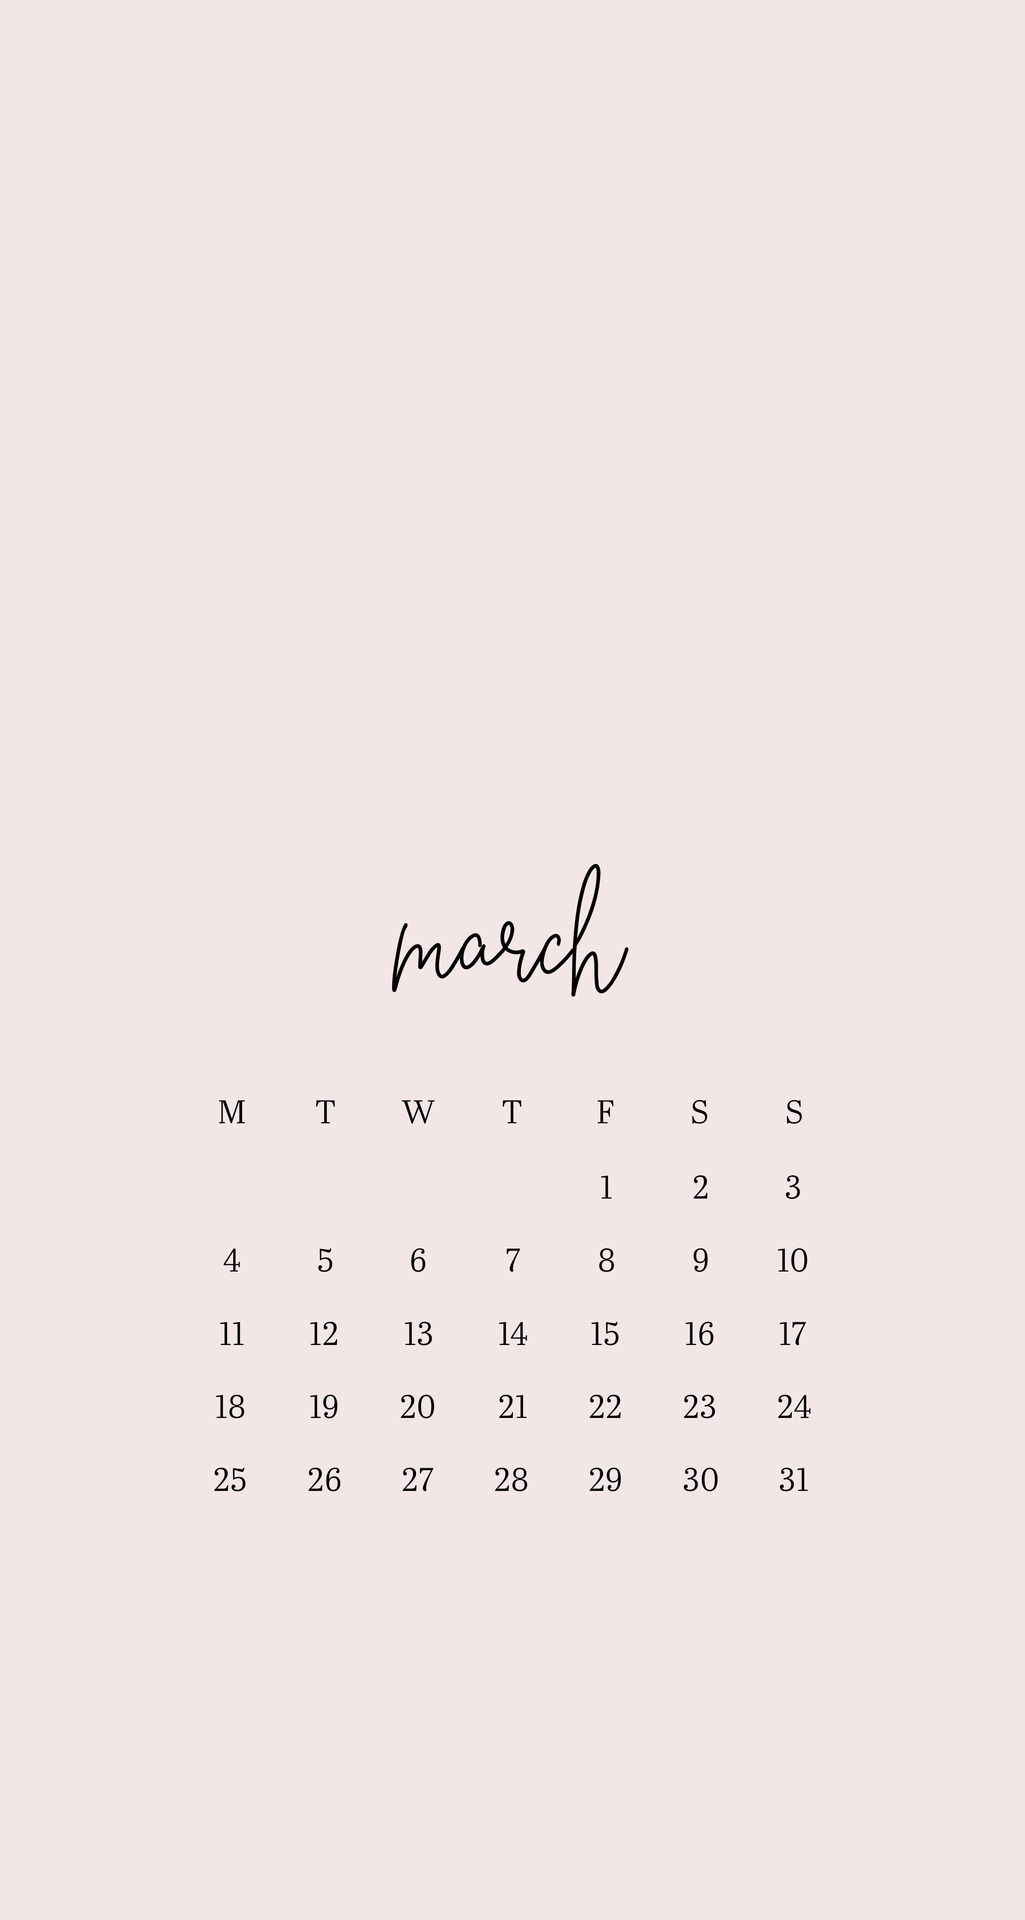 Emma S Studyblr March Organiser Wallpapers Here Are A Selection